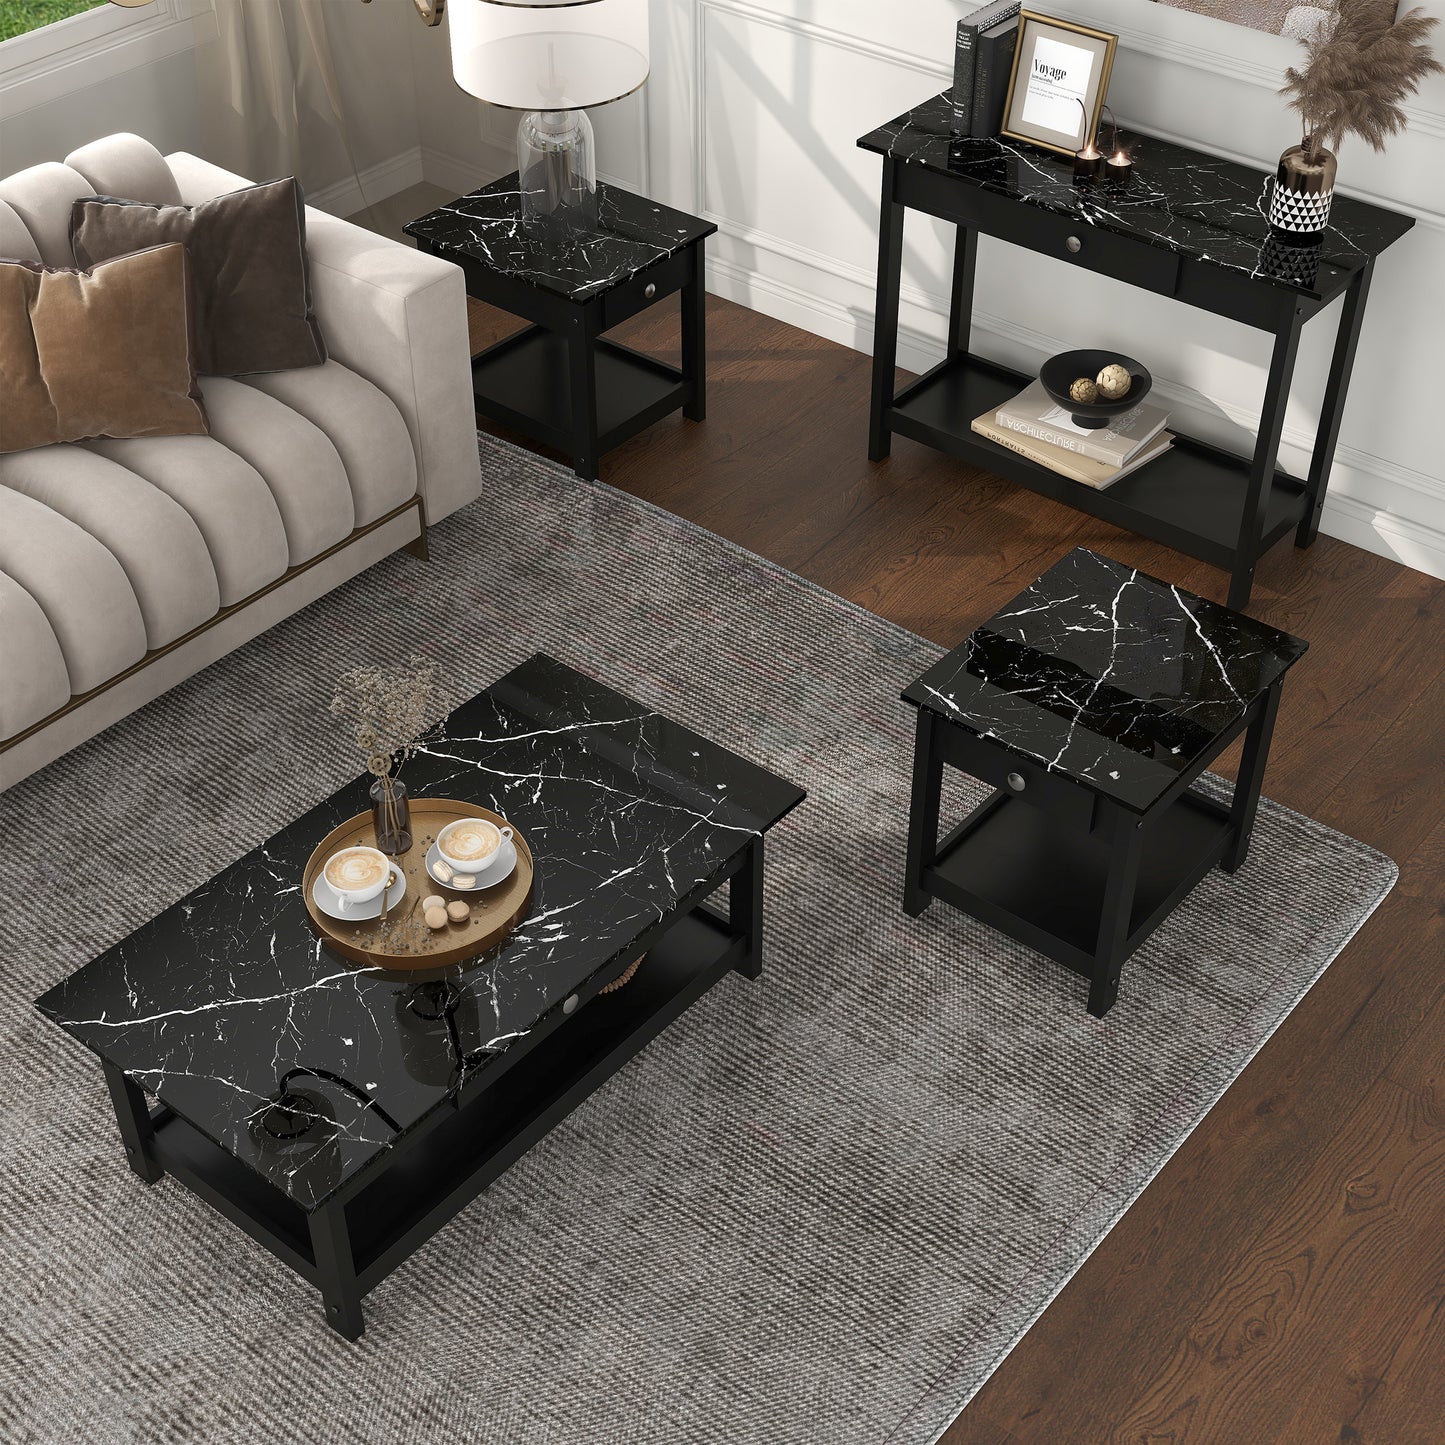 Right angled bird's eye view of a four-piece modern black and faux marble coffee table set with lower shelves in a living area with accessories